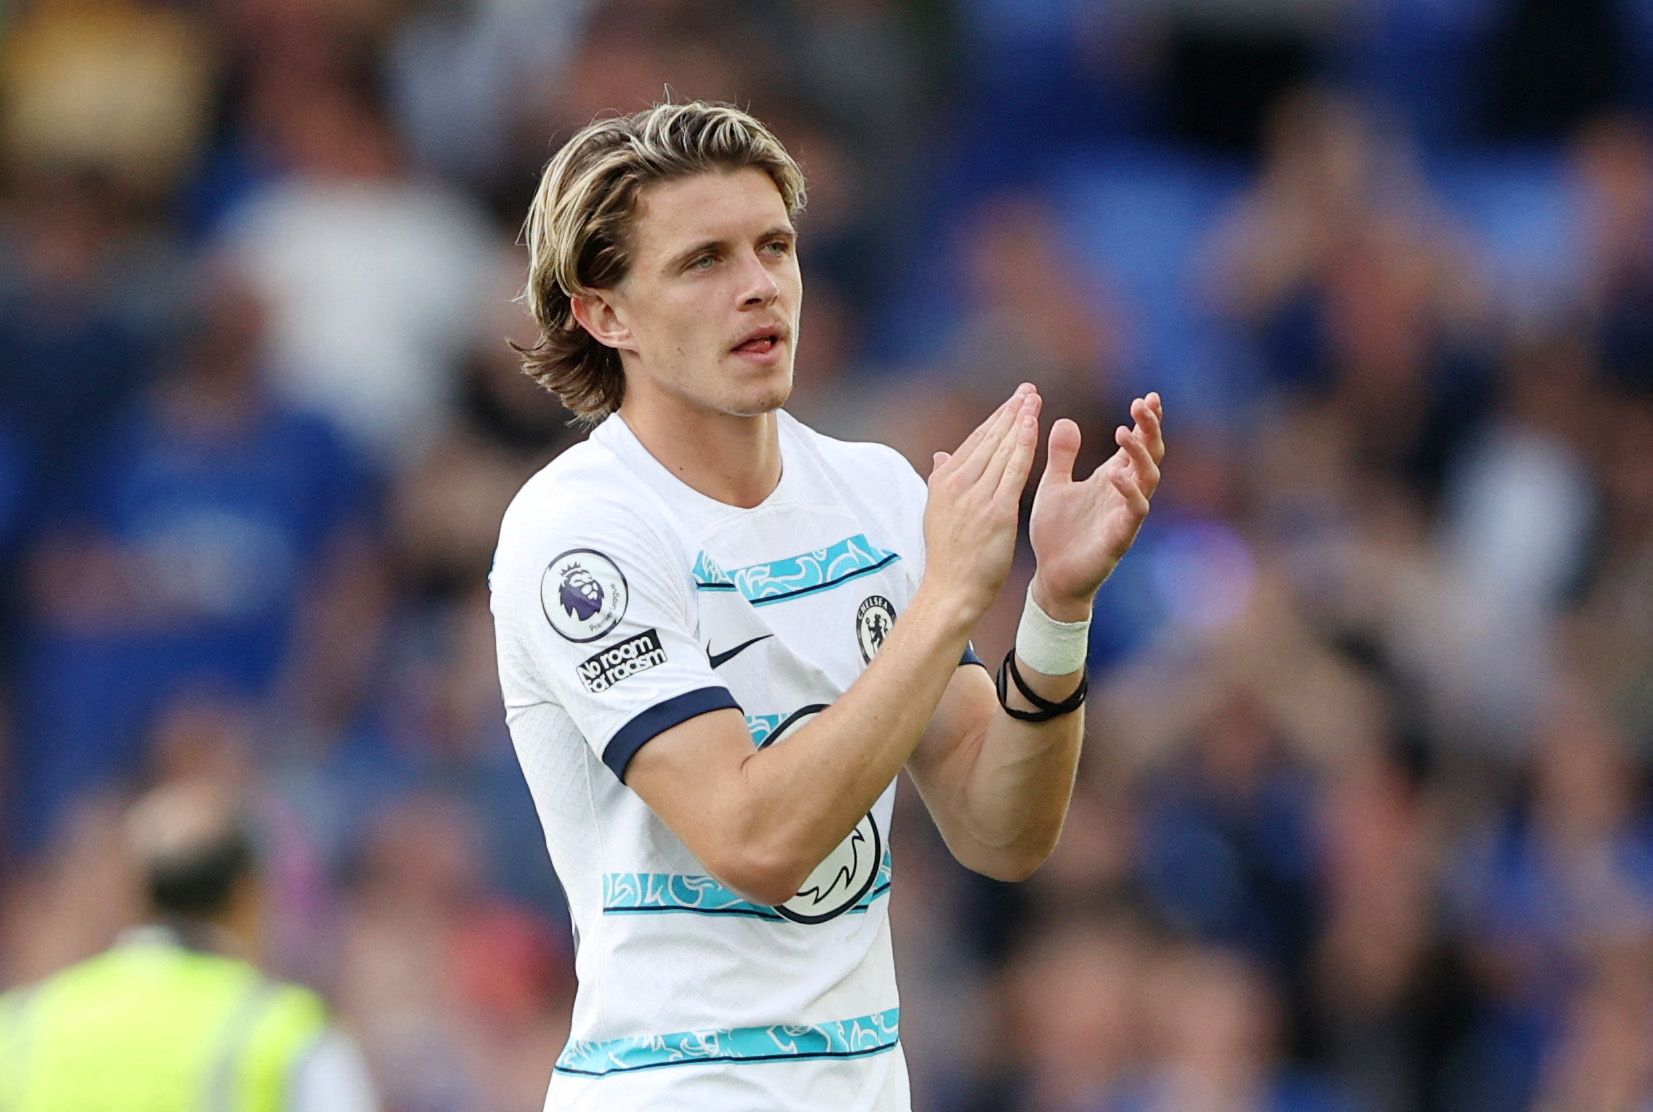 West Ham: Irons would have taken Conor Gallagher on loan -Follow up